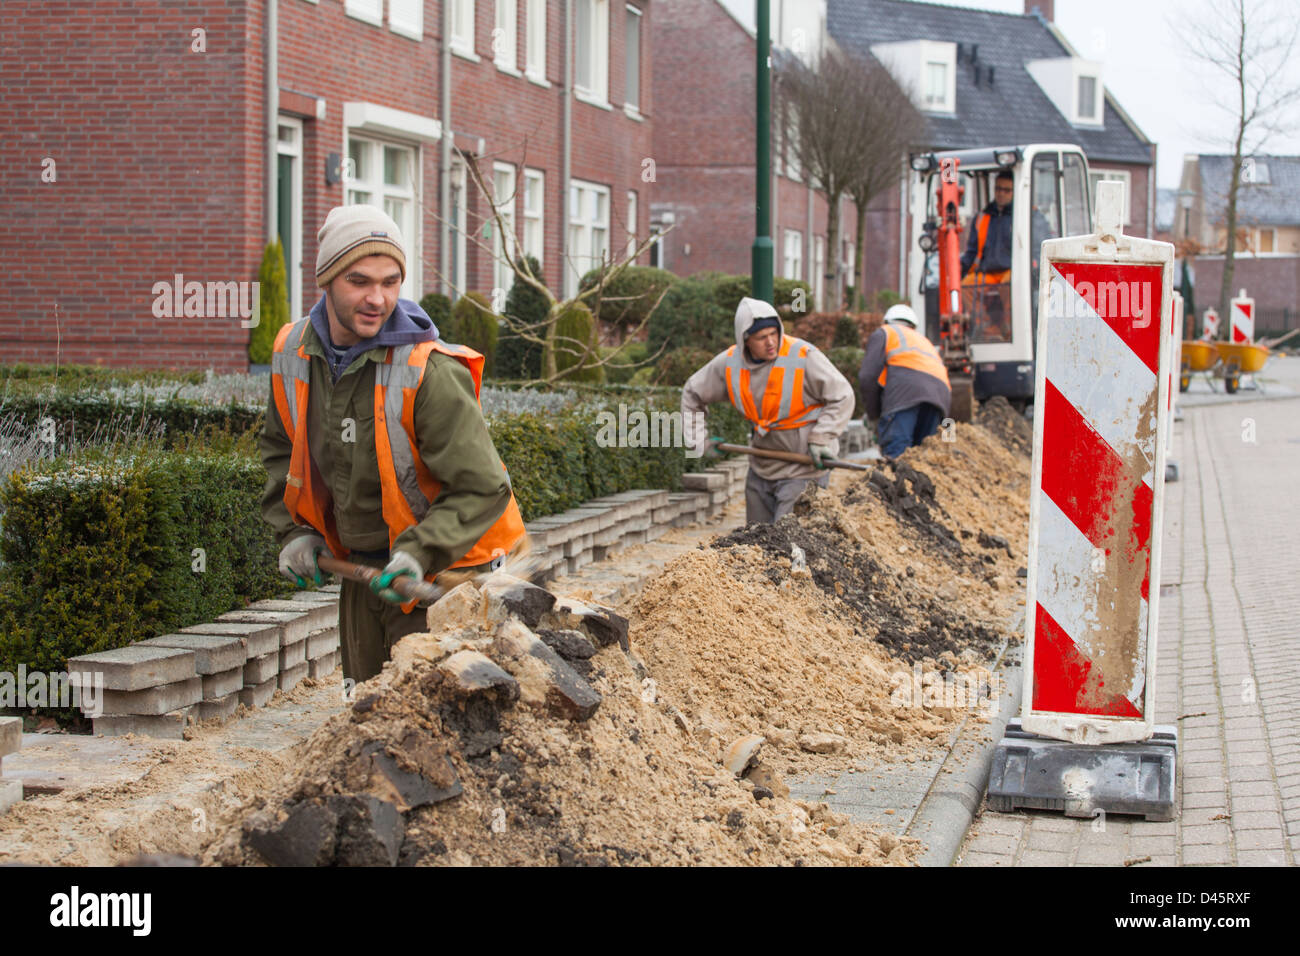 Hungarian migrant workers do earth work for the construction of a glass fiber infrastructure in Netherlands Stock Photo